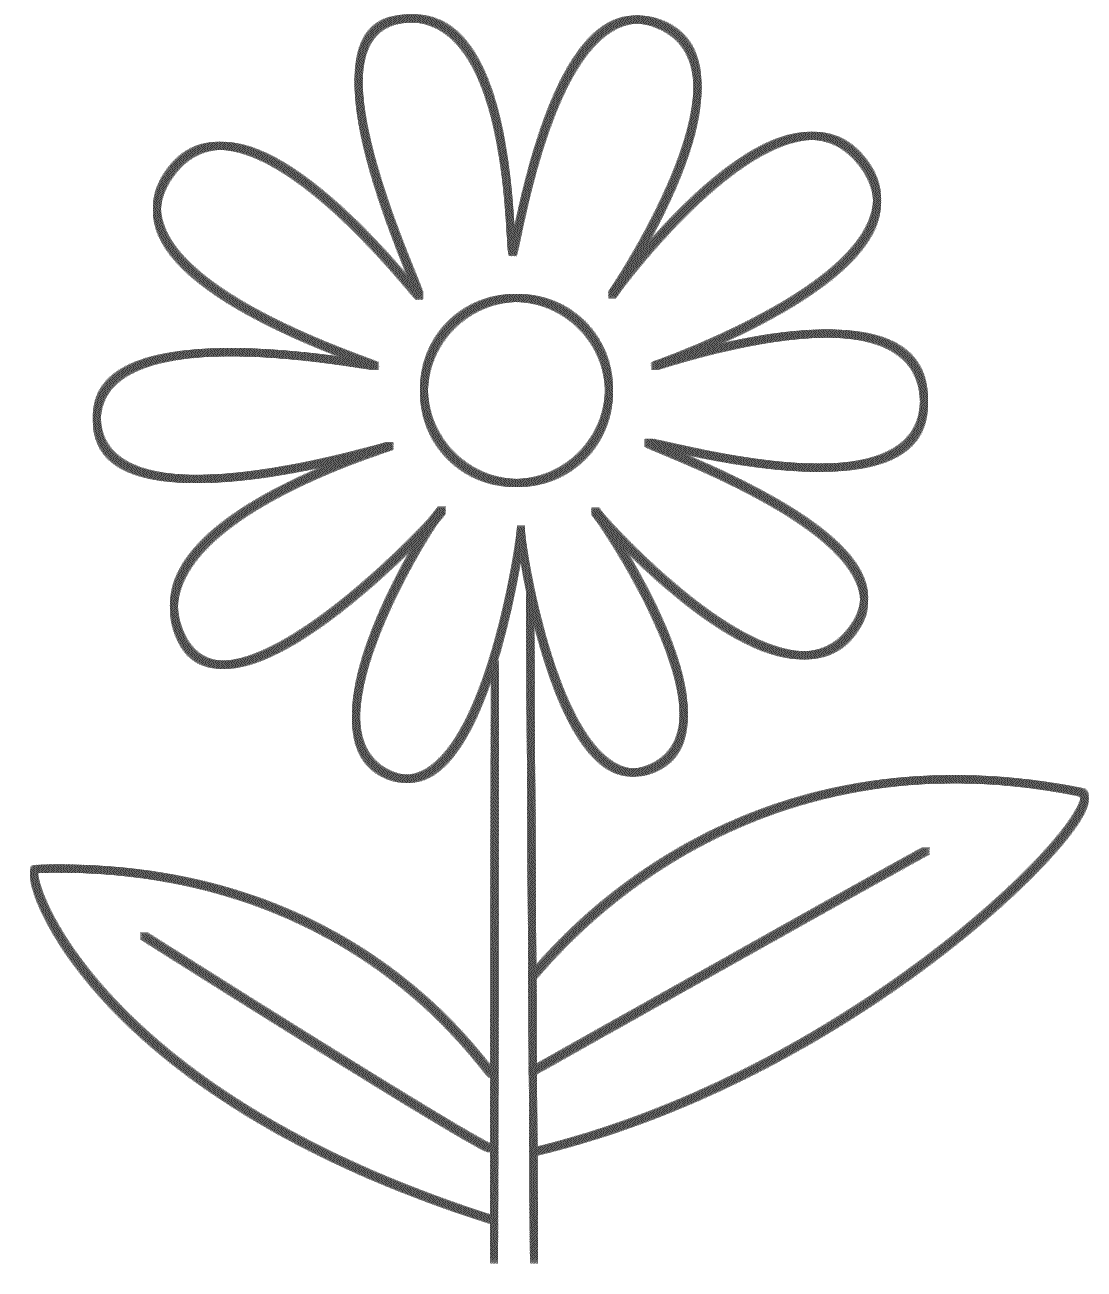 Flowers coloring pages free printable and painting | Download free ...